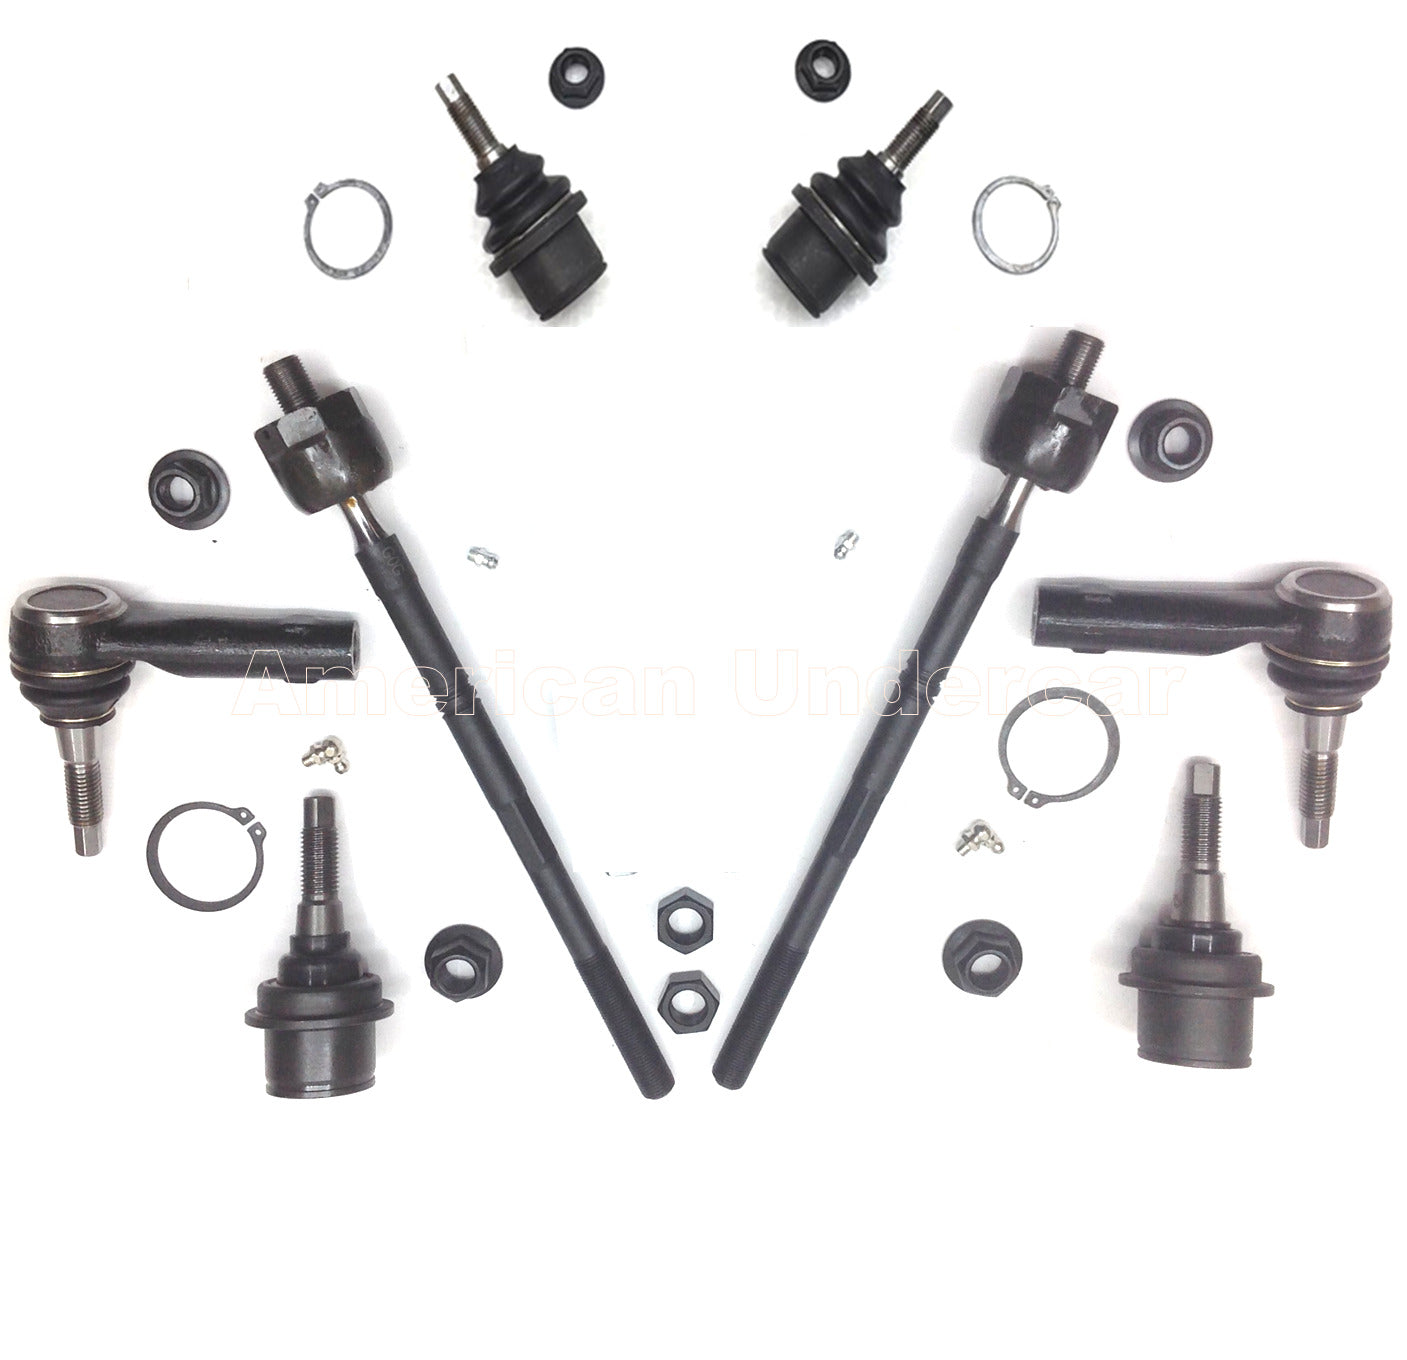 Lifetime Ball Joints Tie Rod Steering Suspension Kit for 2018-2021 Ford Expedition 4x4